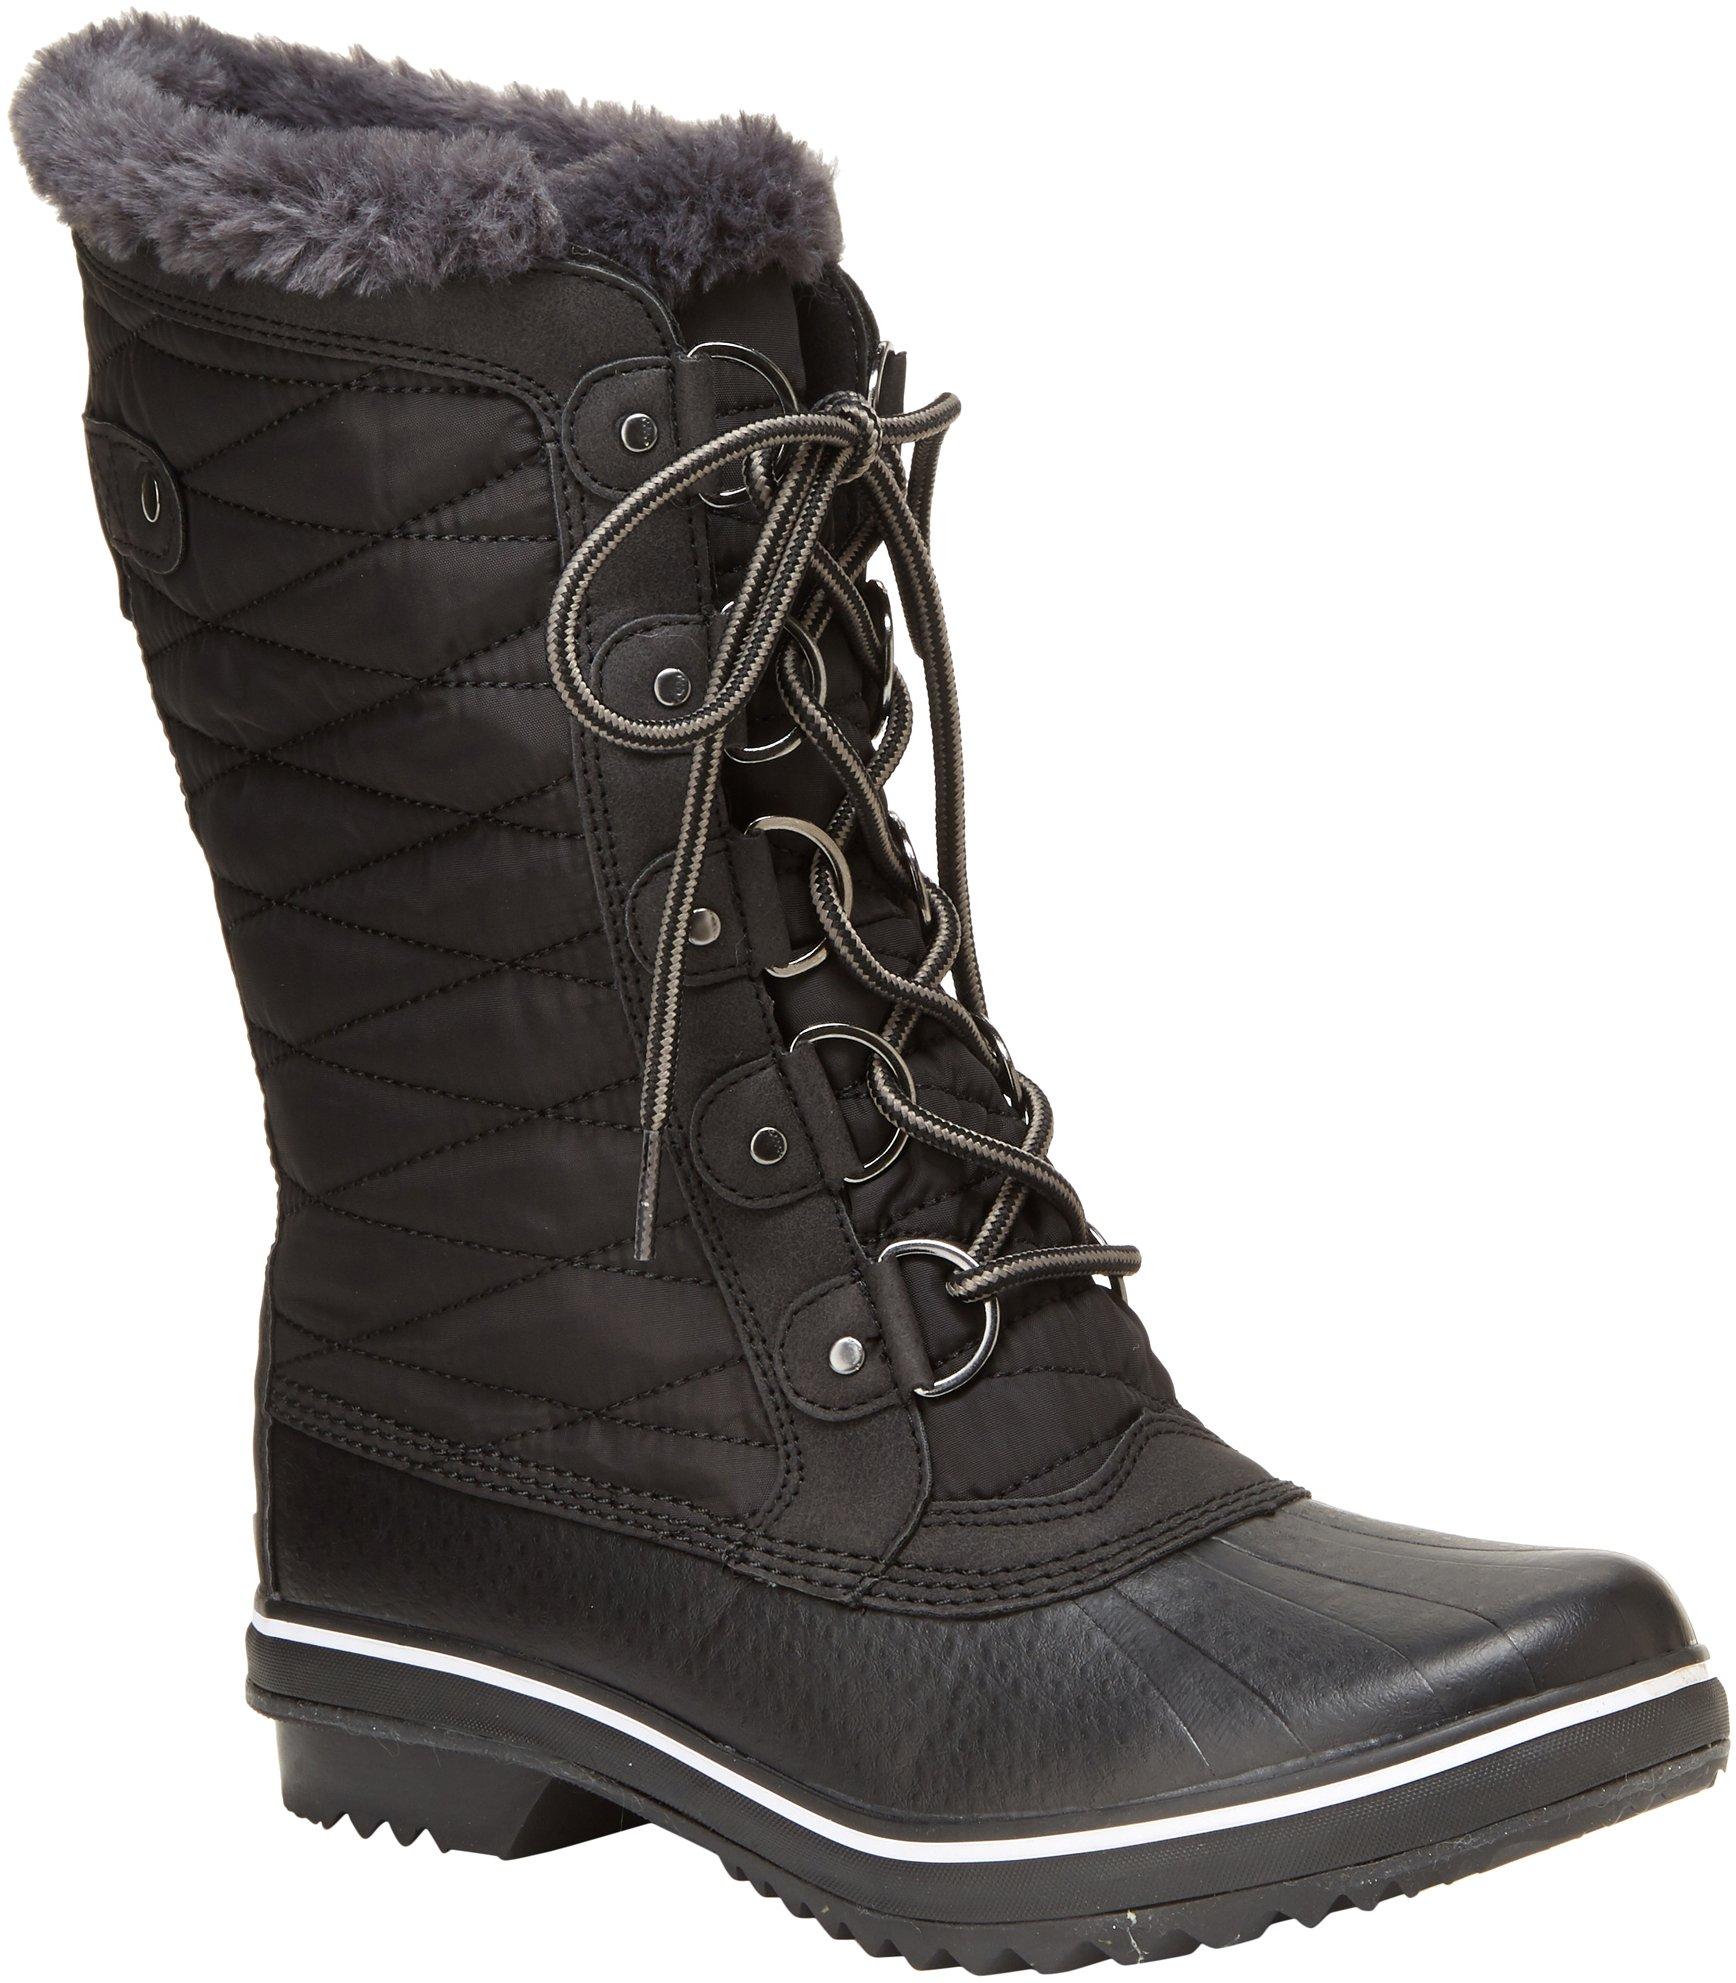 Womens Chilly Water Resistant Boots